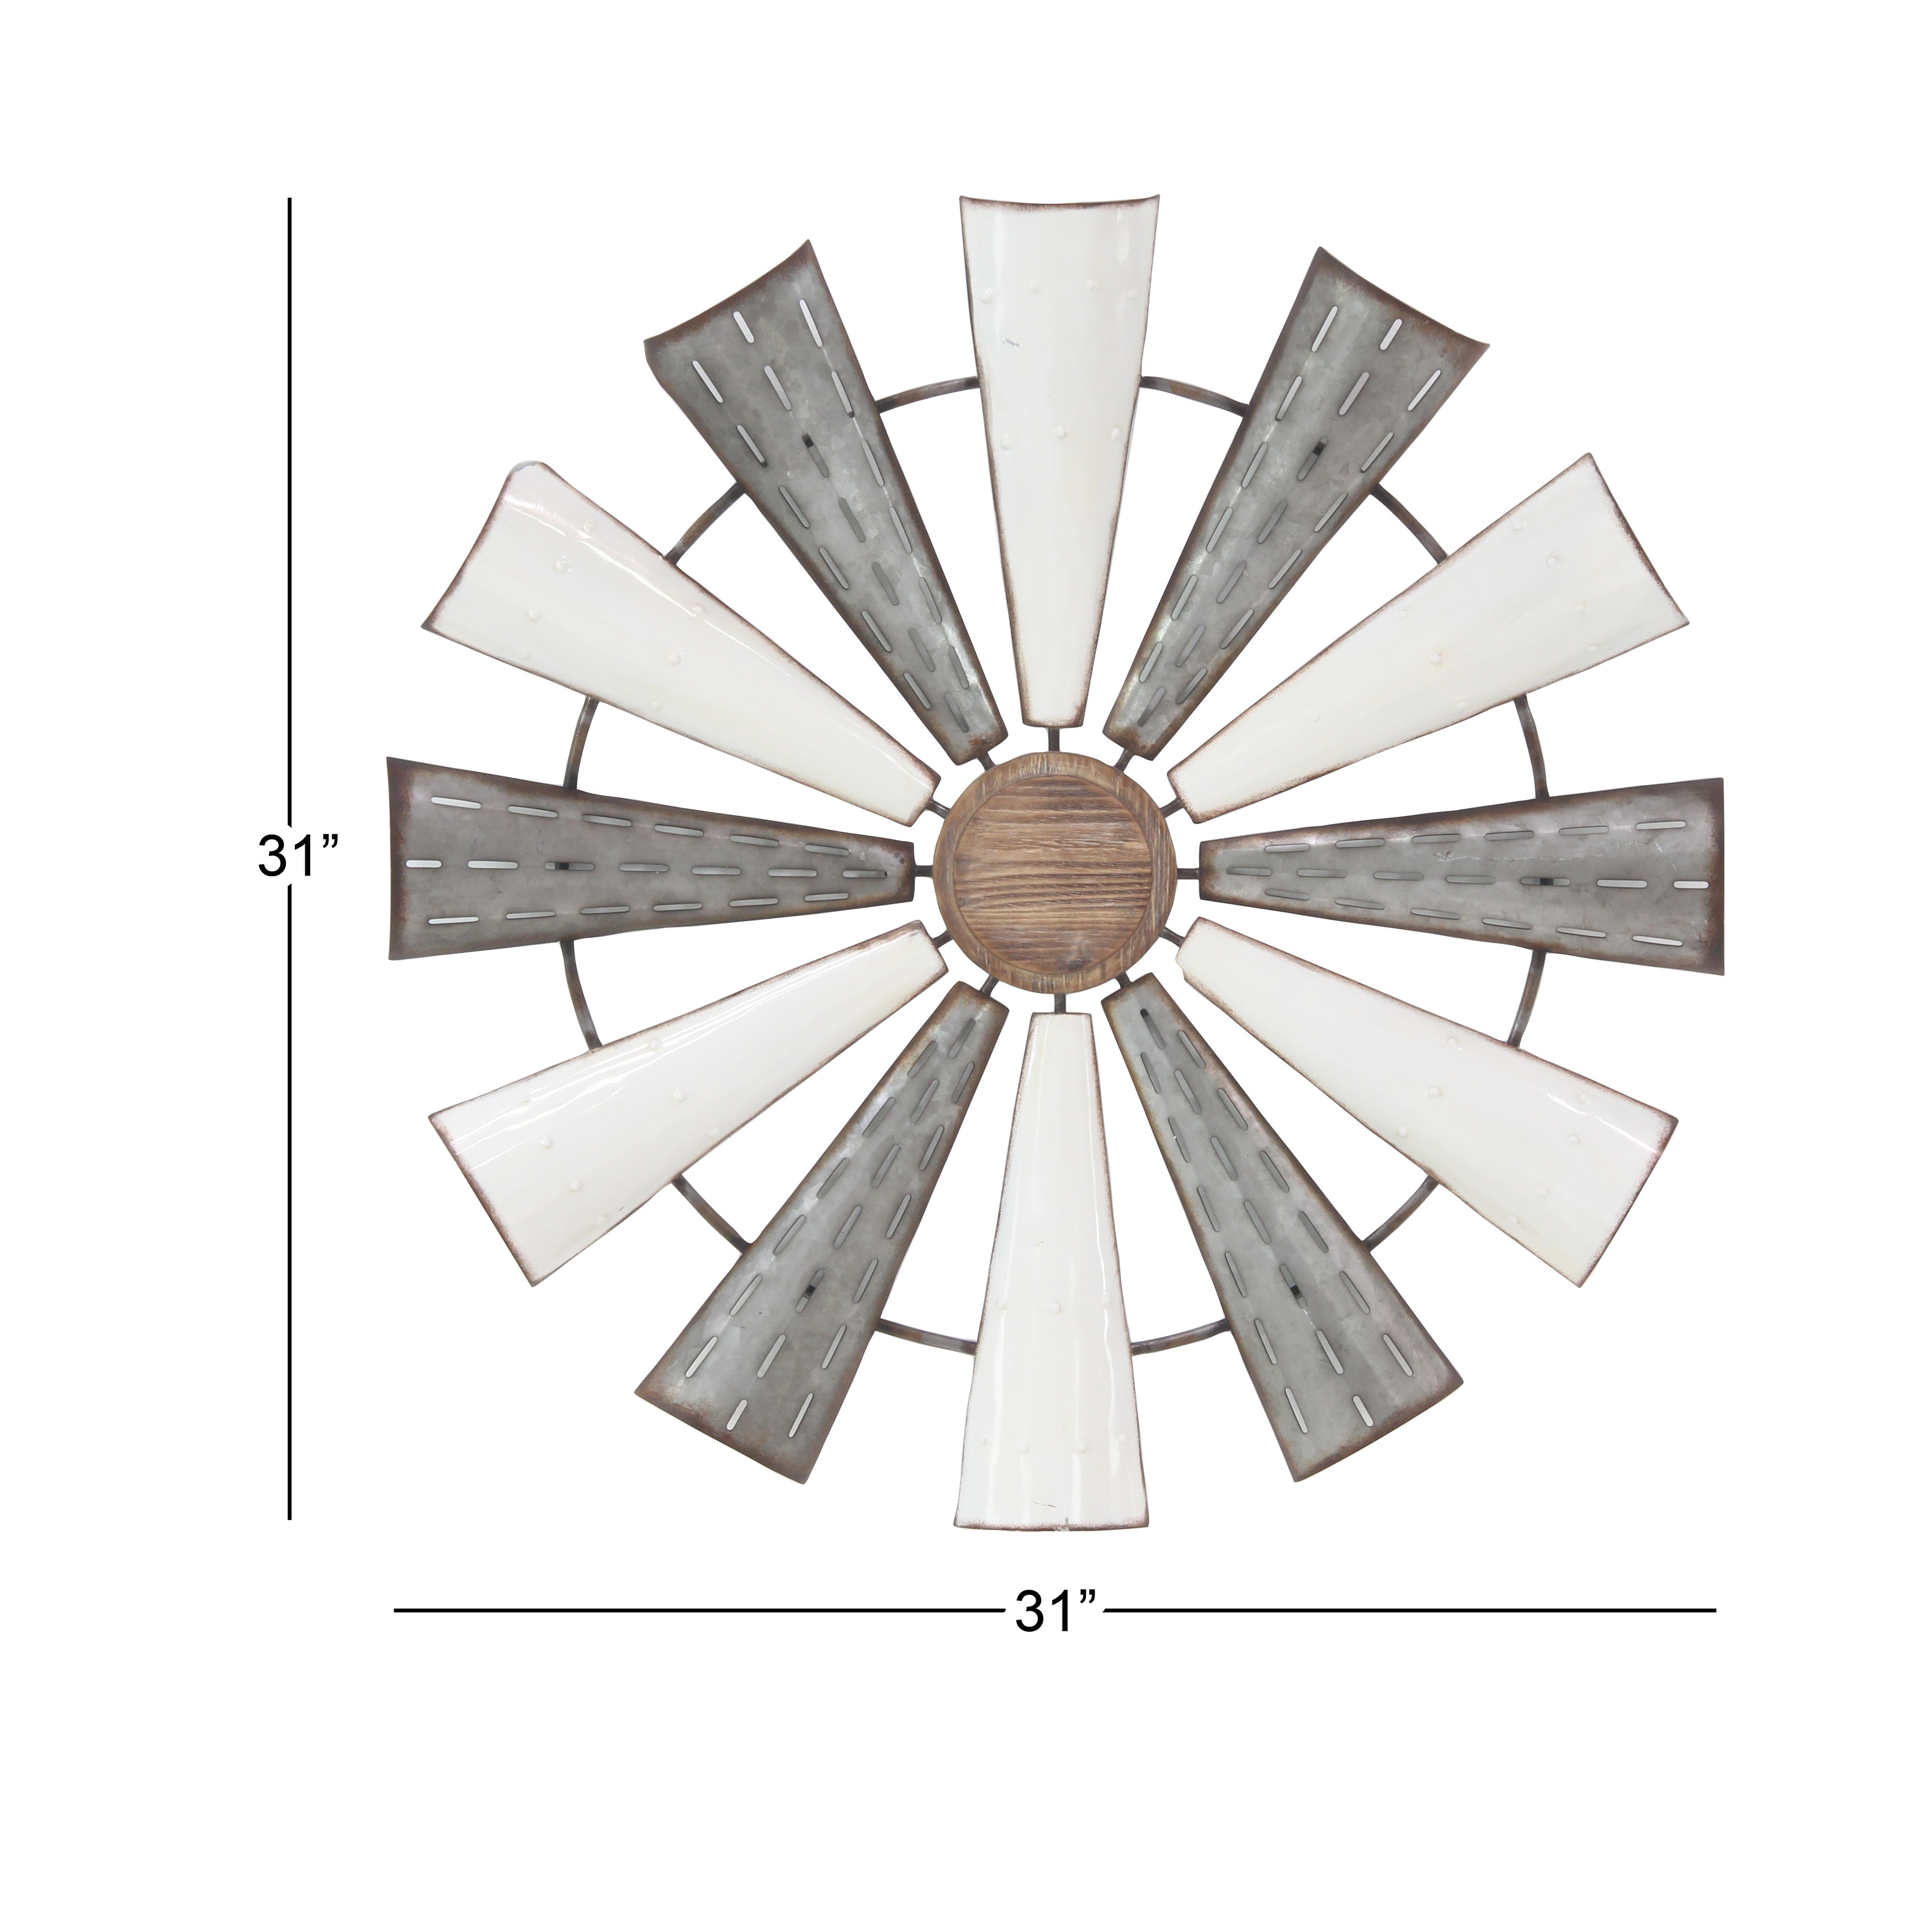 White Metal Windmill Wall Decor with Galvanized Metal Accents - 31 x 2 x 31Round